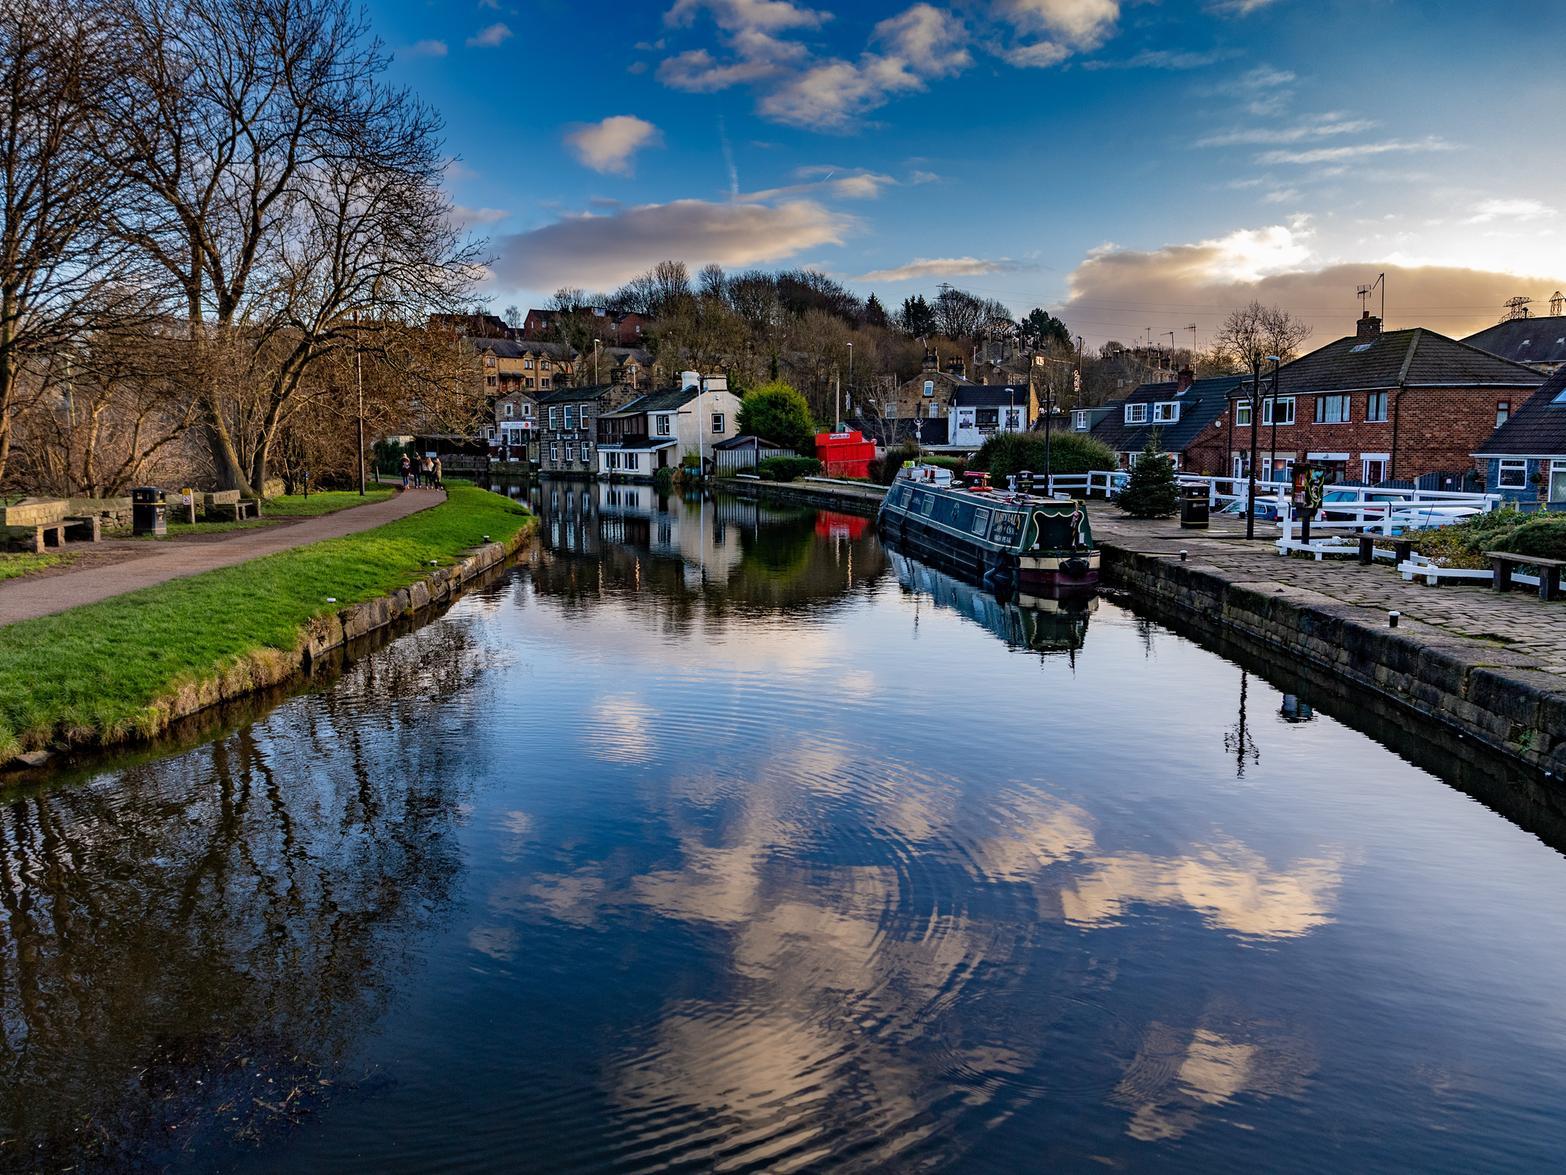 A stroll or bike ride along the canal is well-favoured by locals and tourists alike. The canal takes in sights such as Kirkstall Abbey and the picturesque villages of Rodley (pictured) and Calverley.